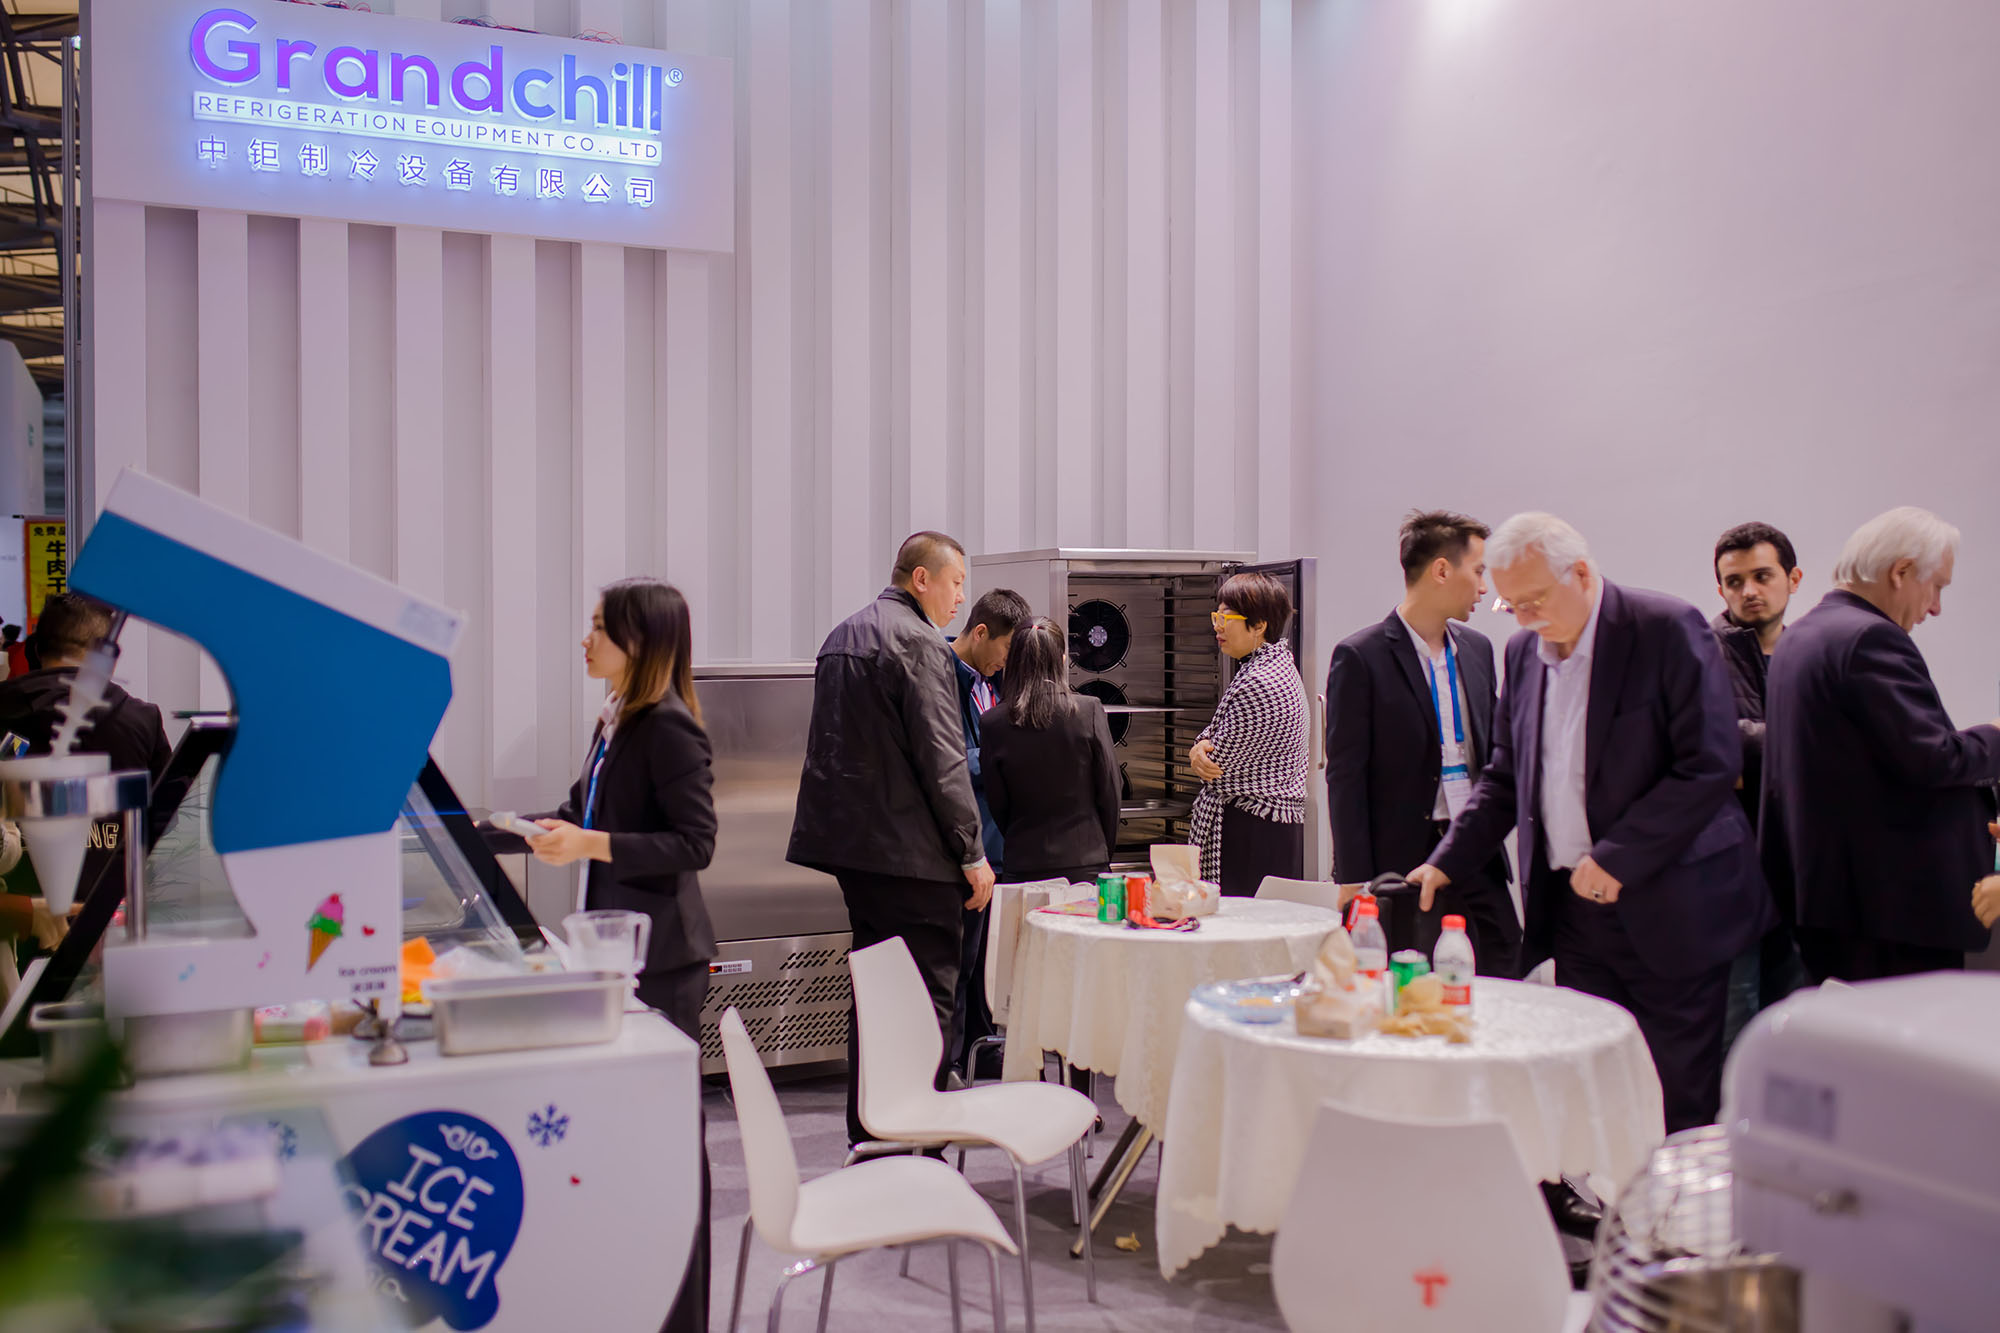 Over 200 Vistors at Our Grandchill Refrigeration Booth